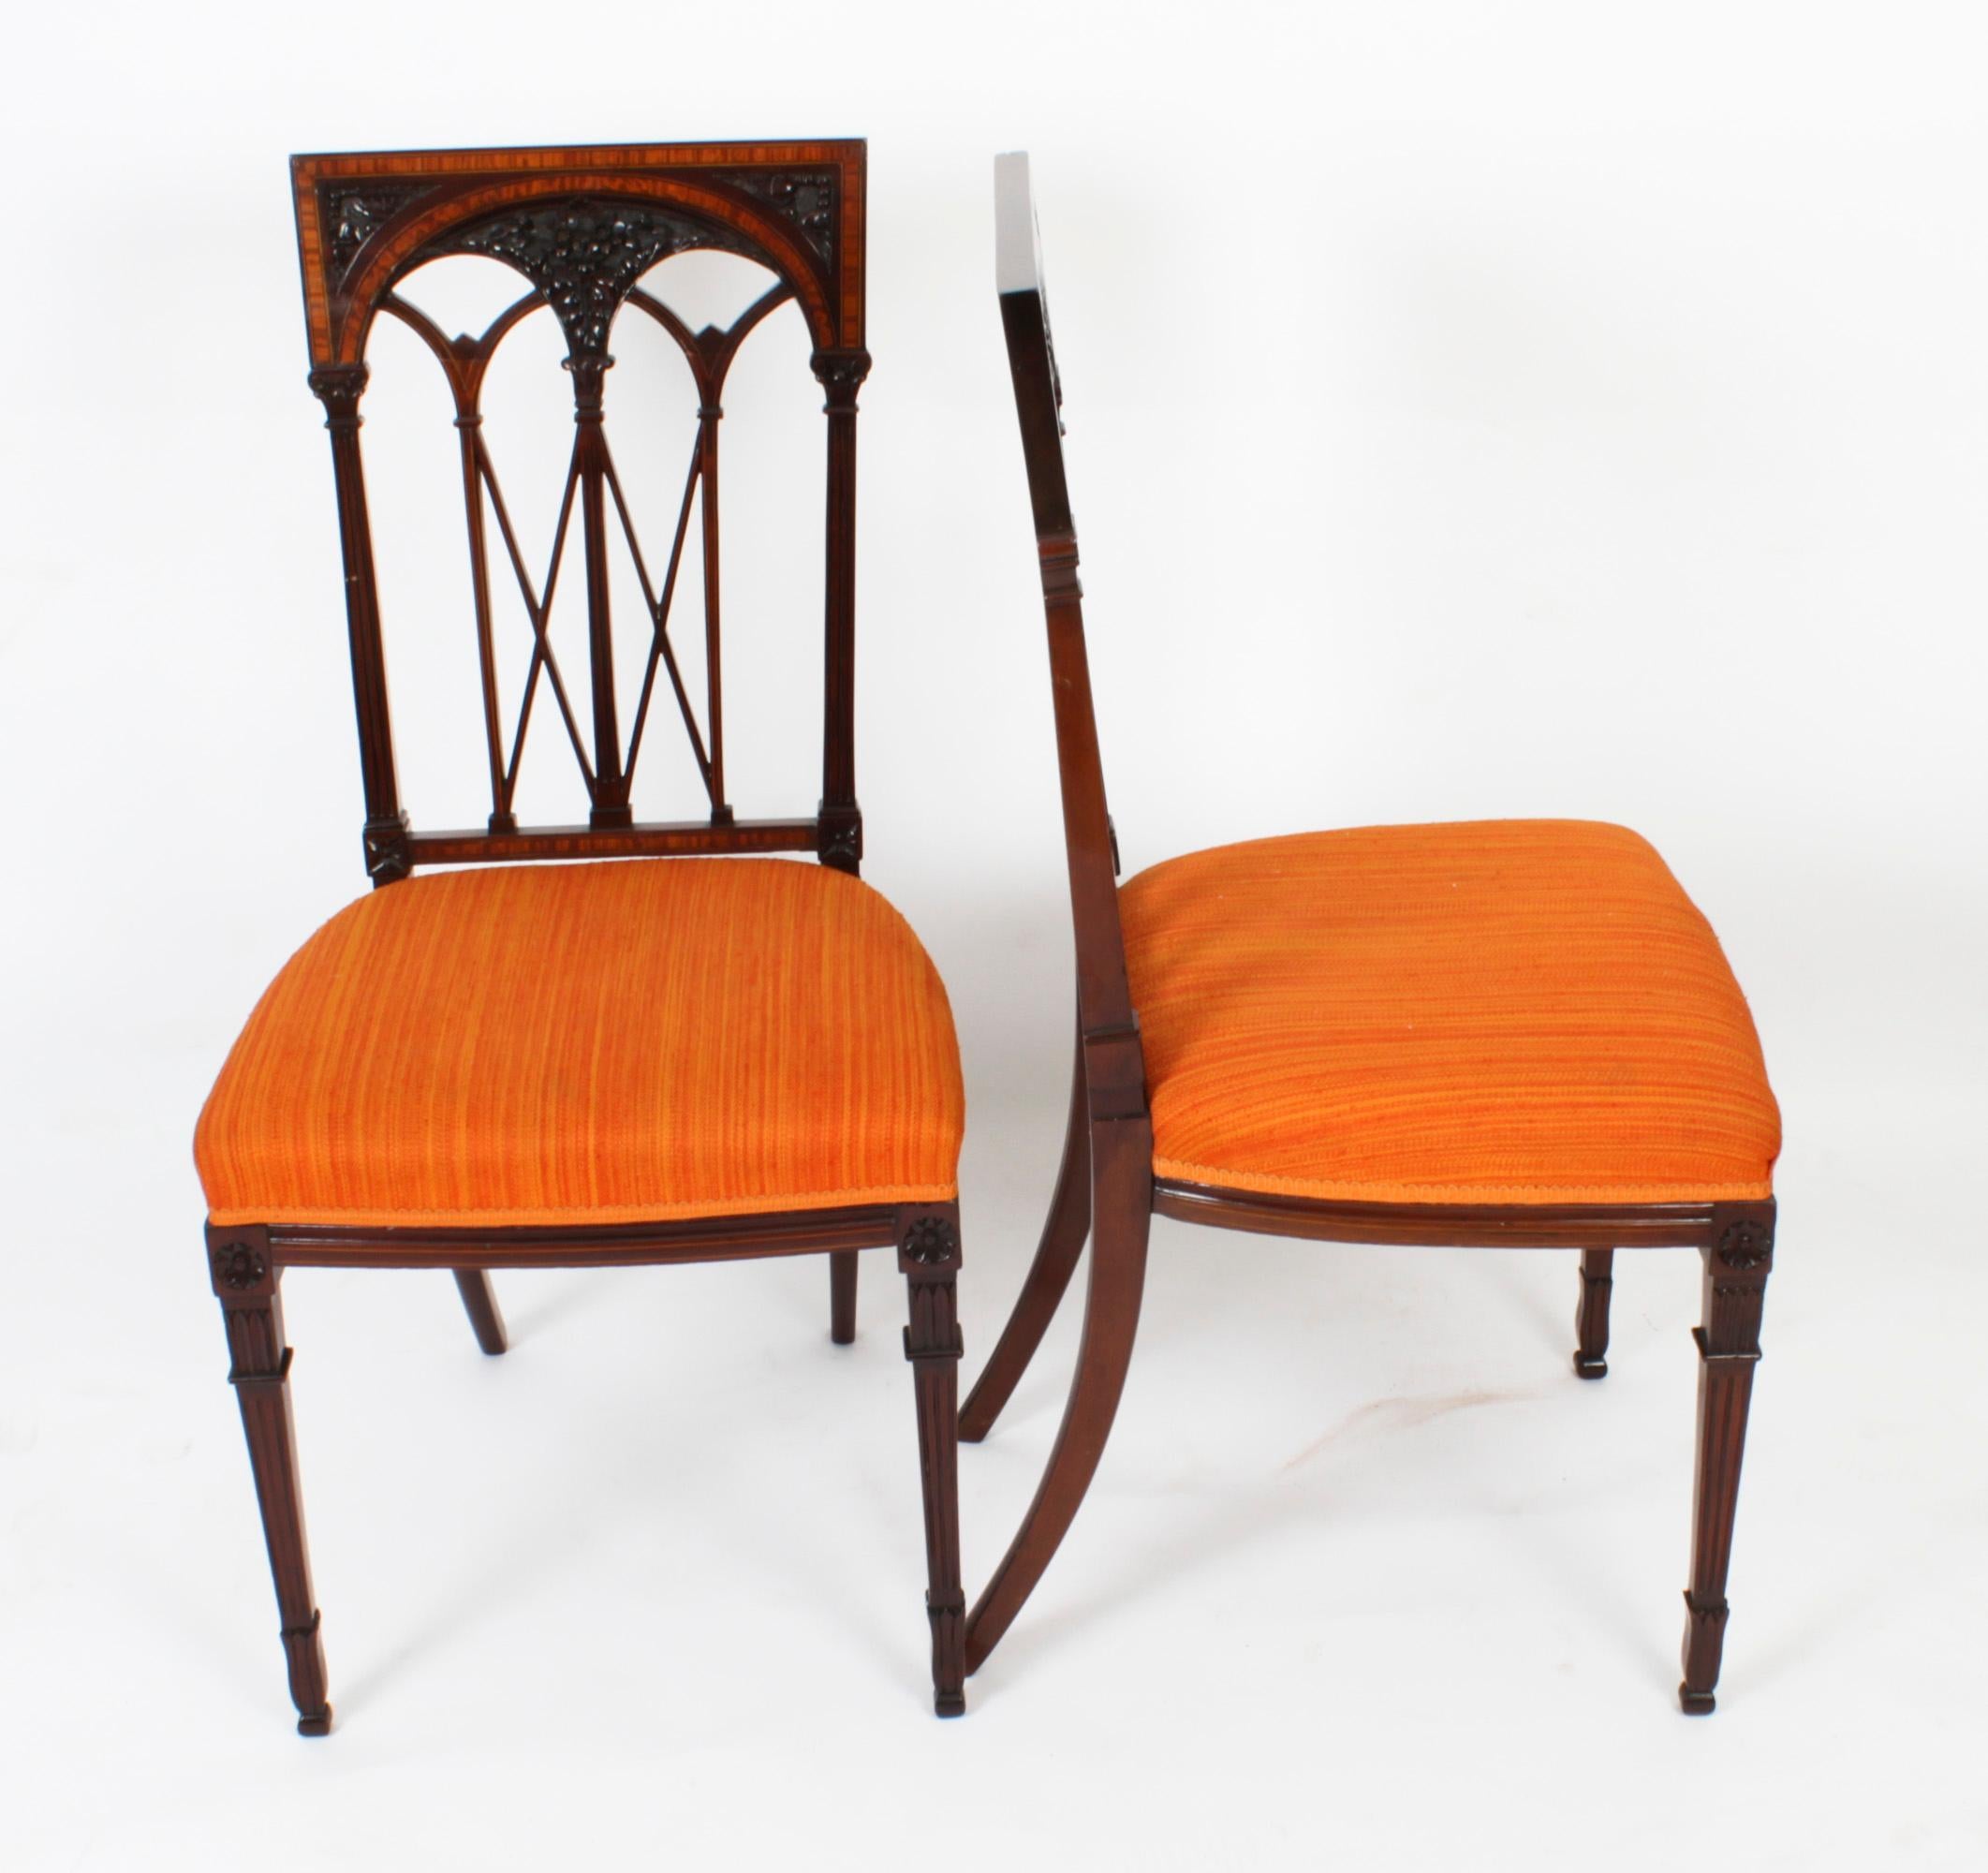 A superb and striking pair of Sheraton Revival mahogany and satinwood banded chairs, Circa 1900 in date.

The high back chairs feature satinwood banding with boxwood and ebonised line inlay and wonderful foliate carved decoration. The square tops